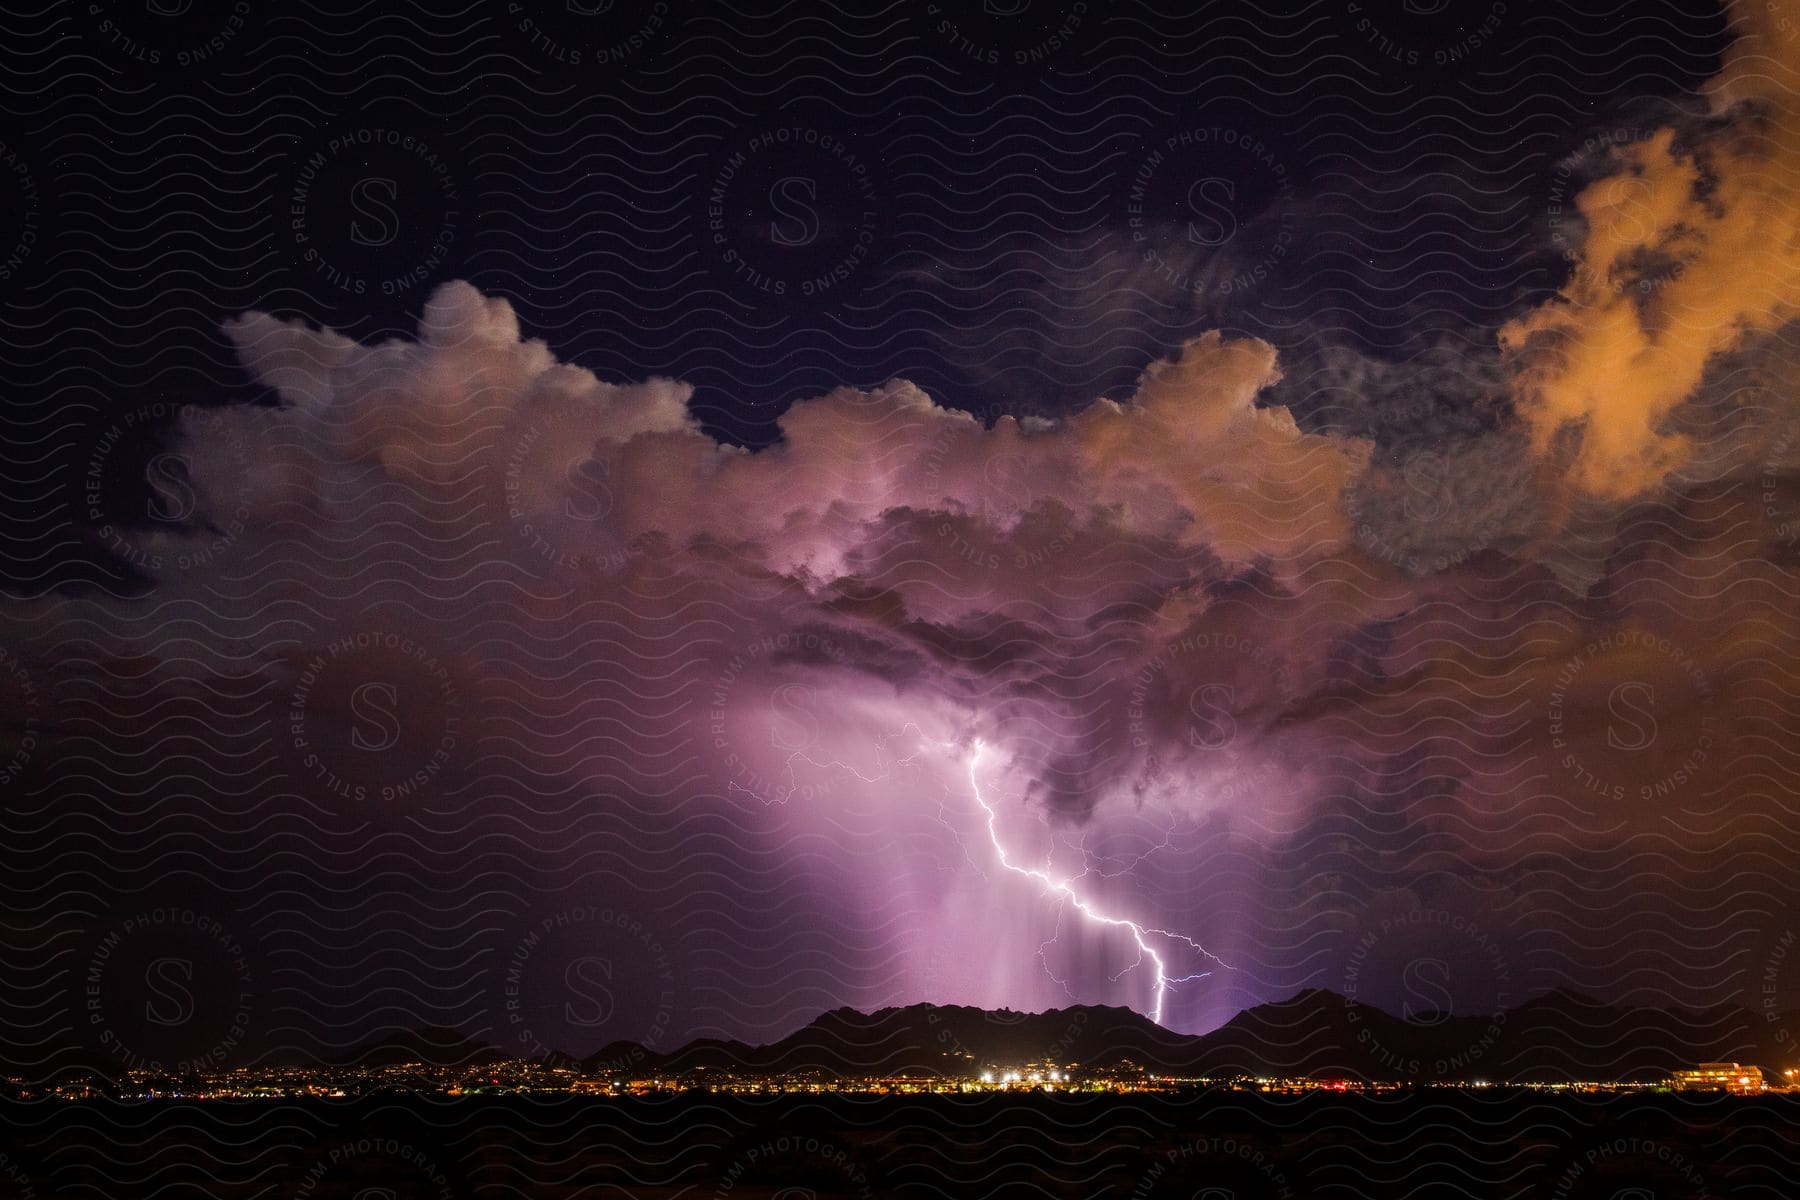 Mountains illuminated by a lightning bolt under storm clouds at night